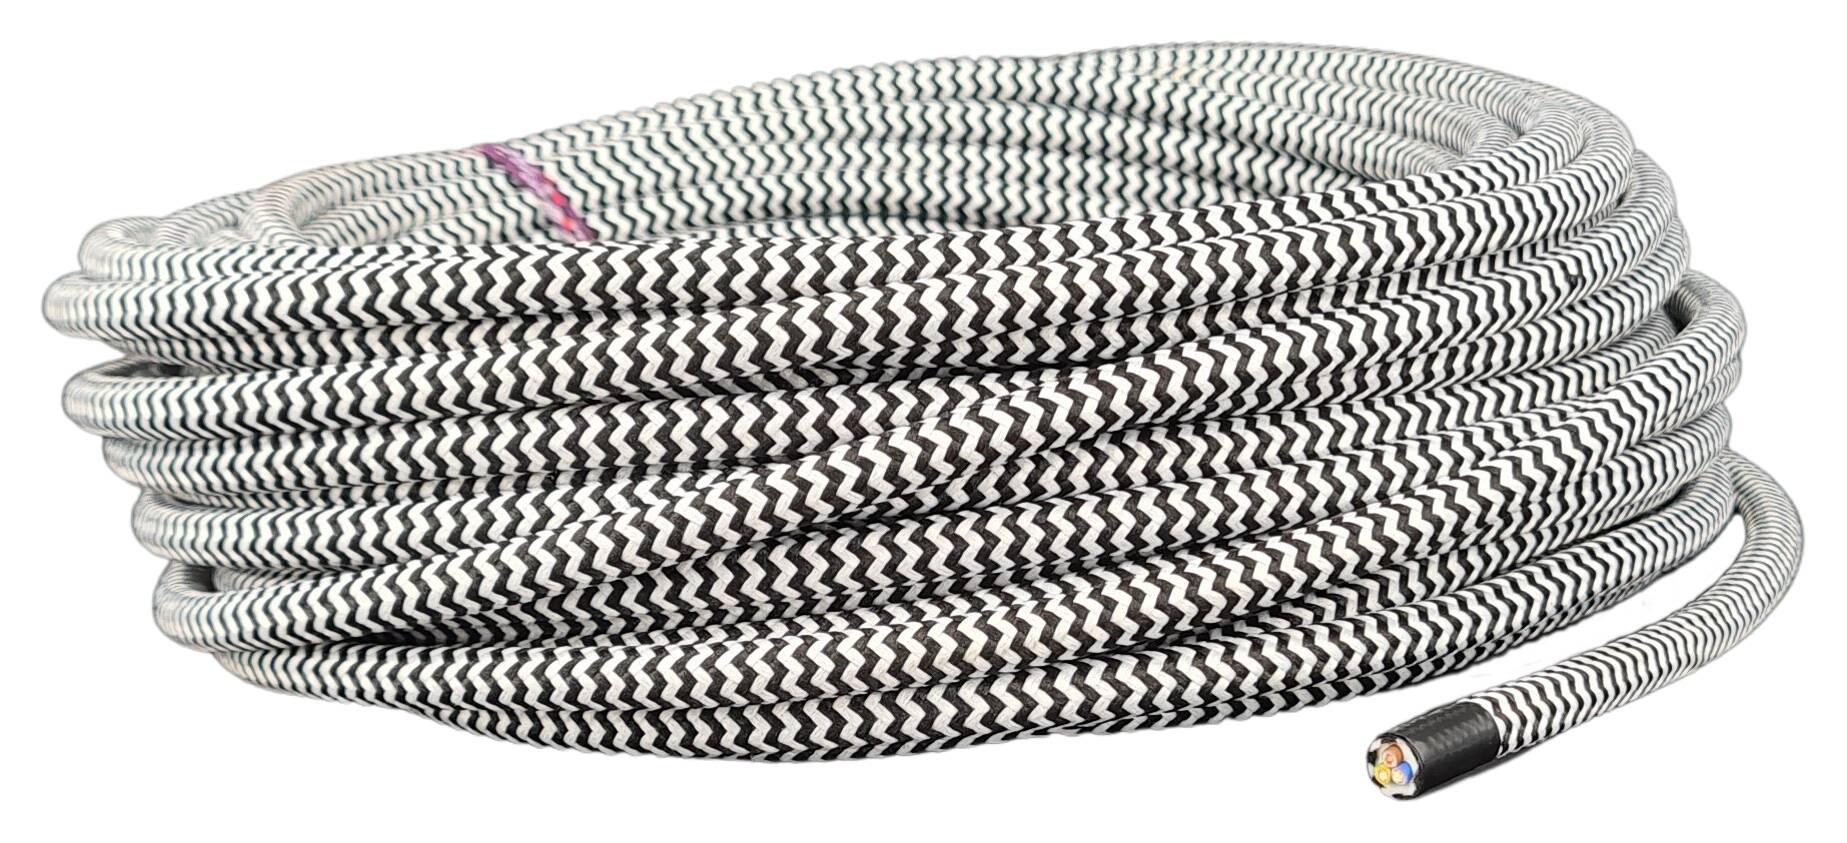 cable 3G 0,75 H03VV-F textile braided zigzag black-white